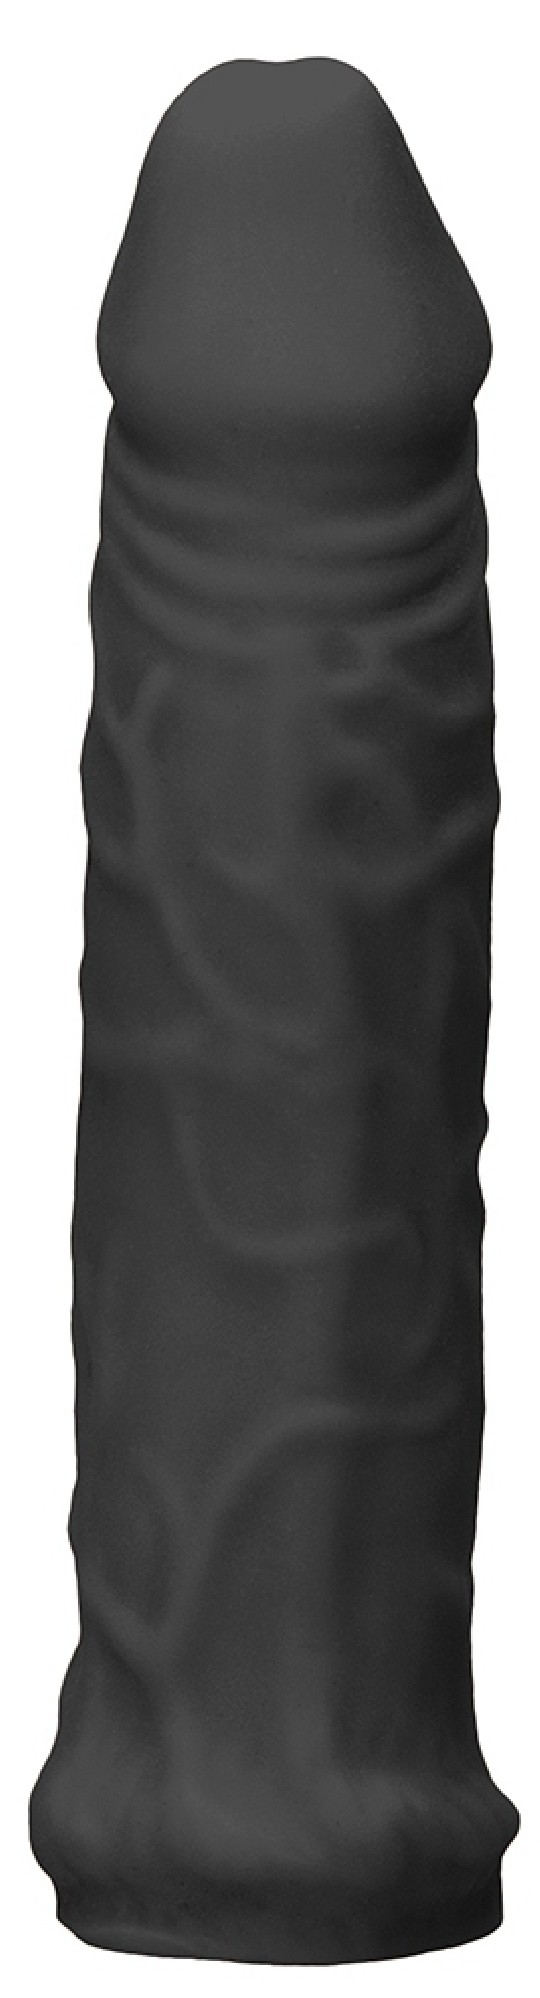 Penis extension Realrock penis sheath 16 x 4cm Black This Realrock penis sheath is an accessory designed as a case to give an ad